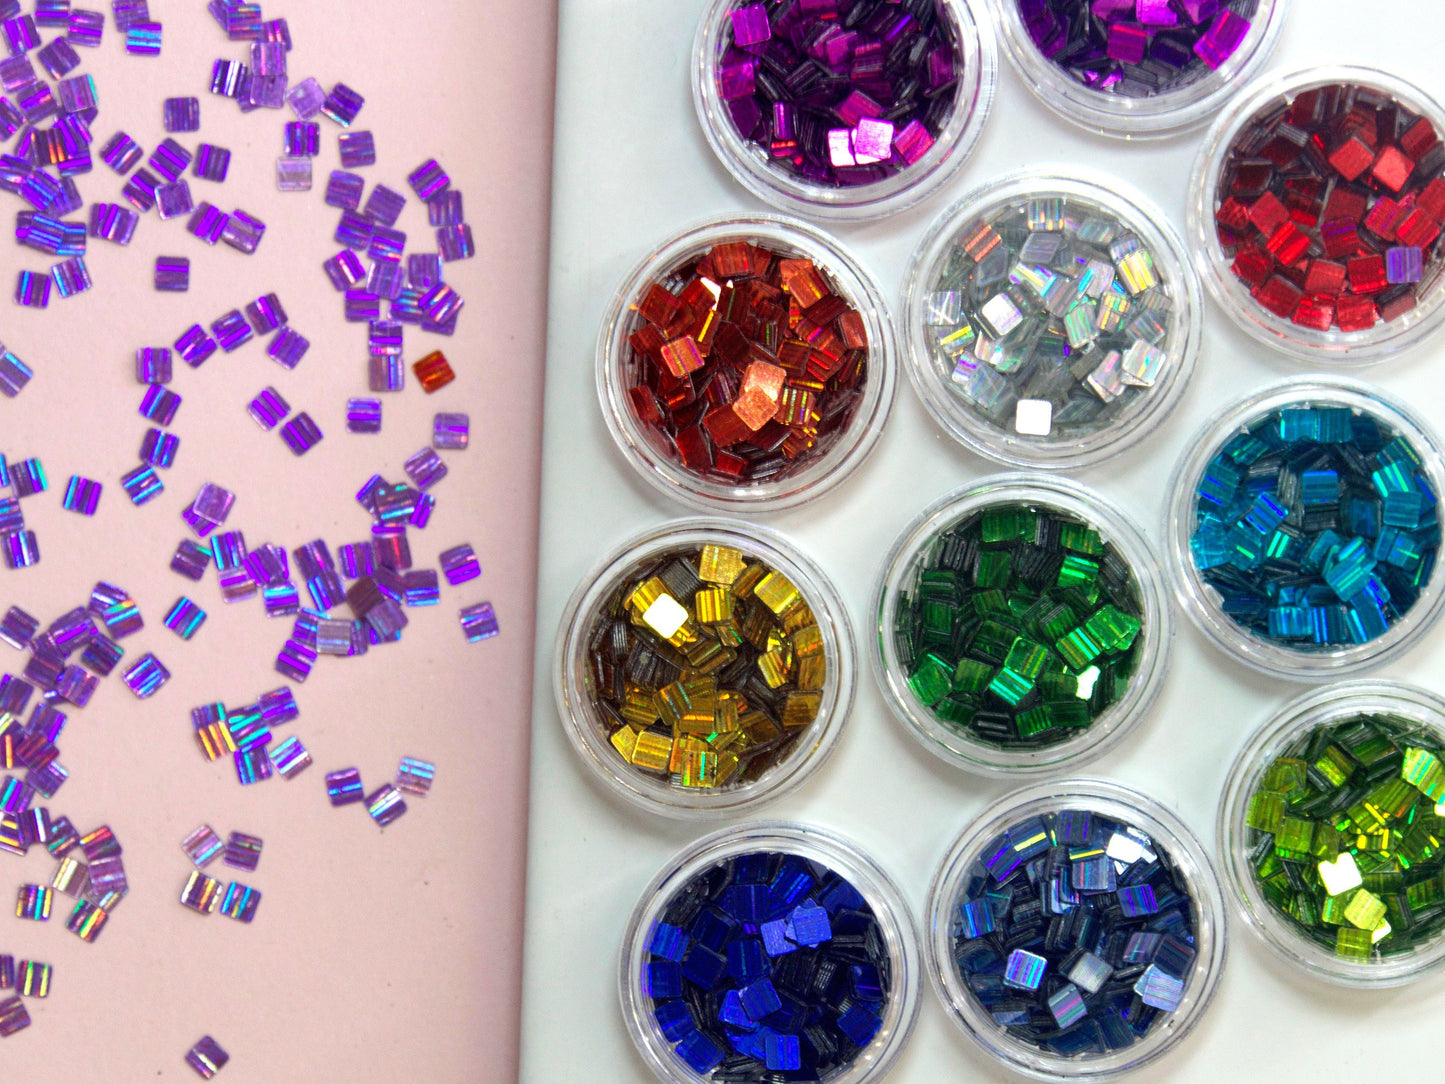 12 jars Square Laser Glitter Chips/ Iridescent Nail Flakes 3D DIY Sequins/Metallic Colors Halo Quadrate Glitters Craft Manicure Supply